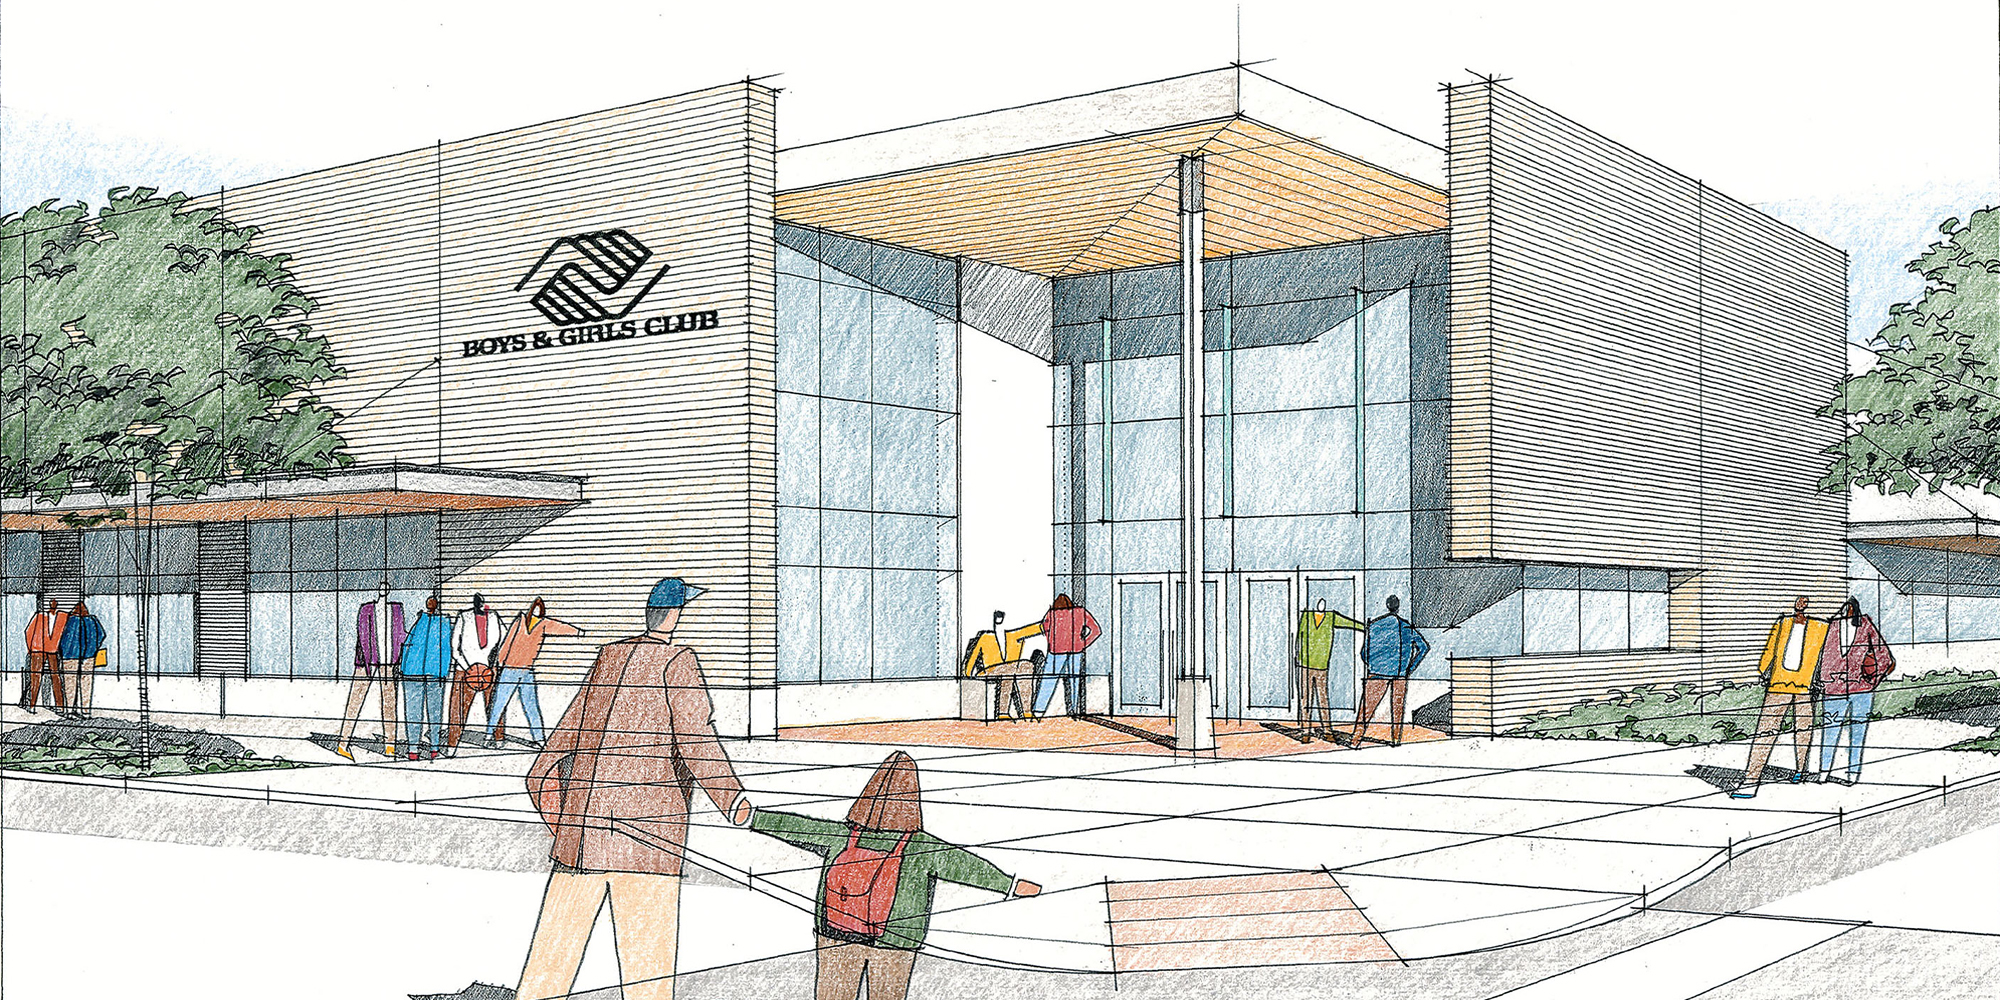 Drawing of Boys & Girls Club part of Rosa Parks Elementary School, For full text please download our project PDF below